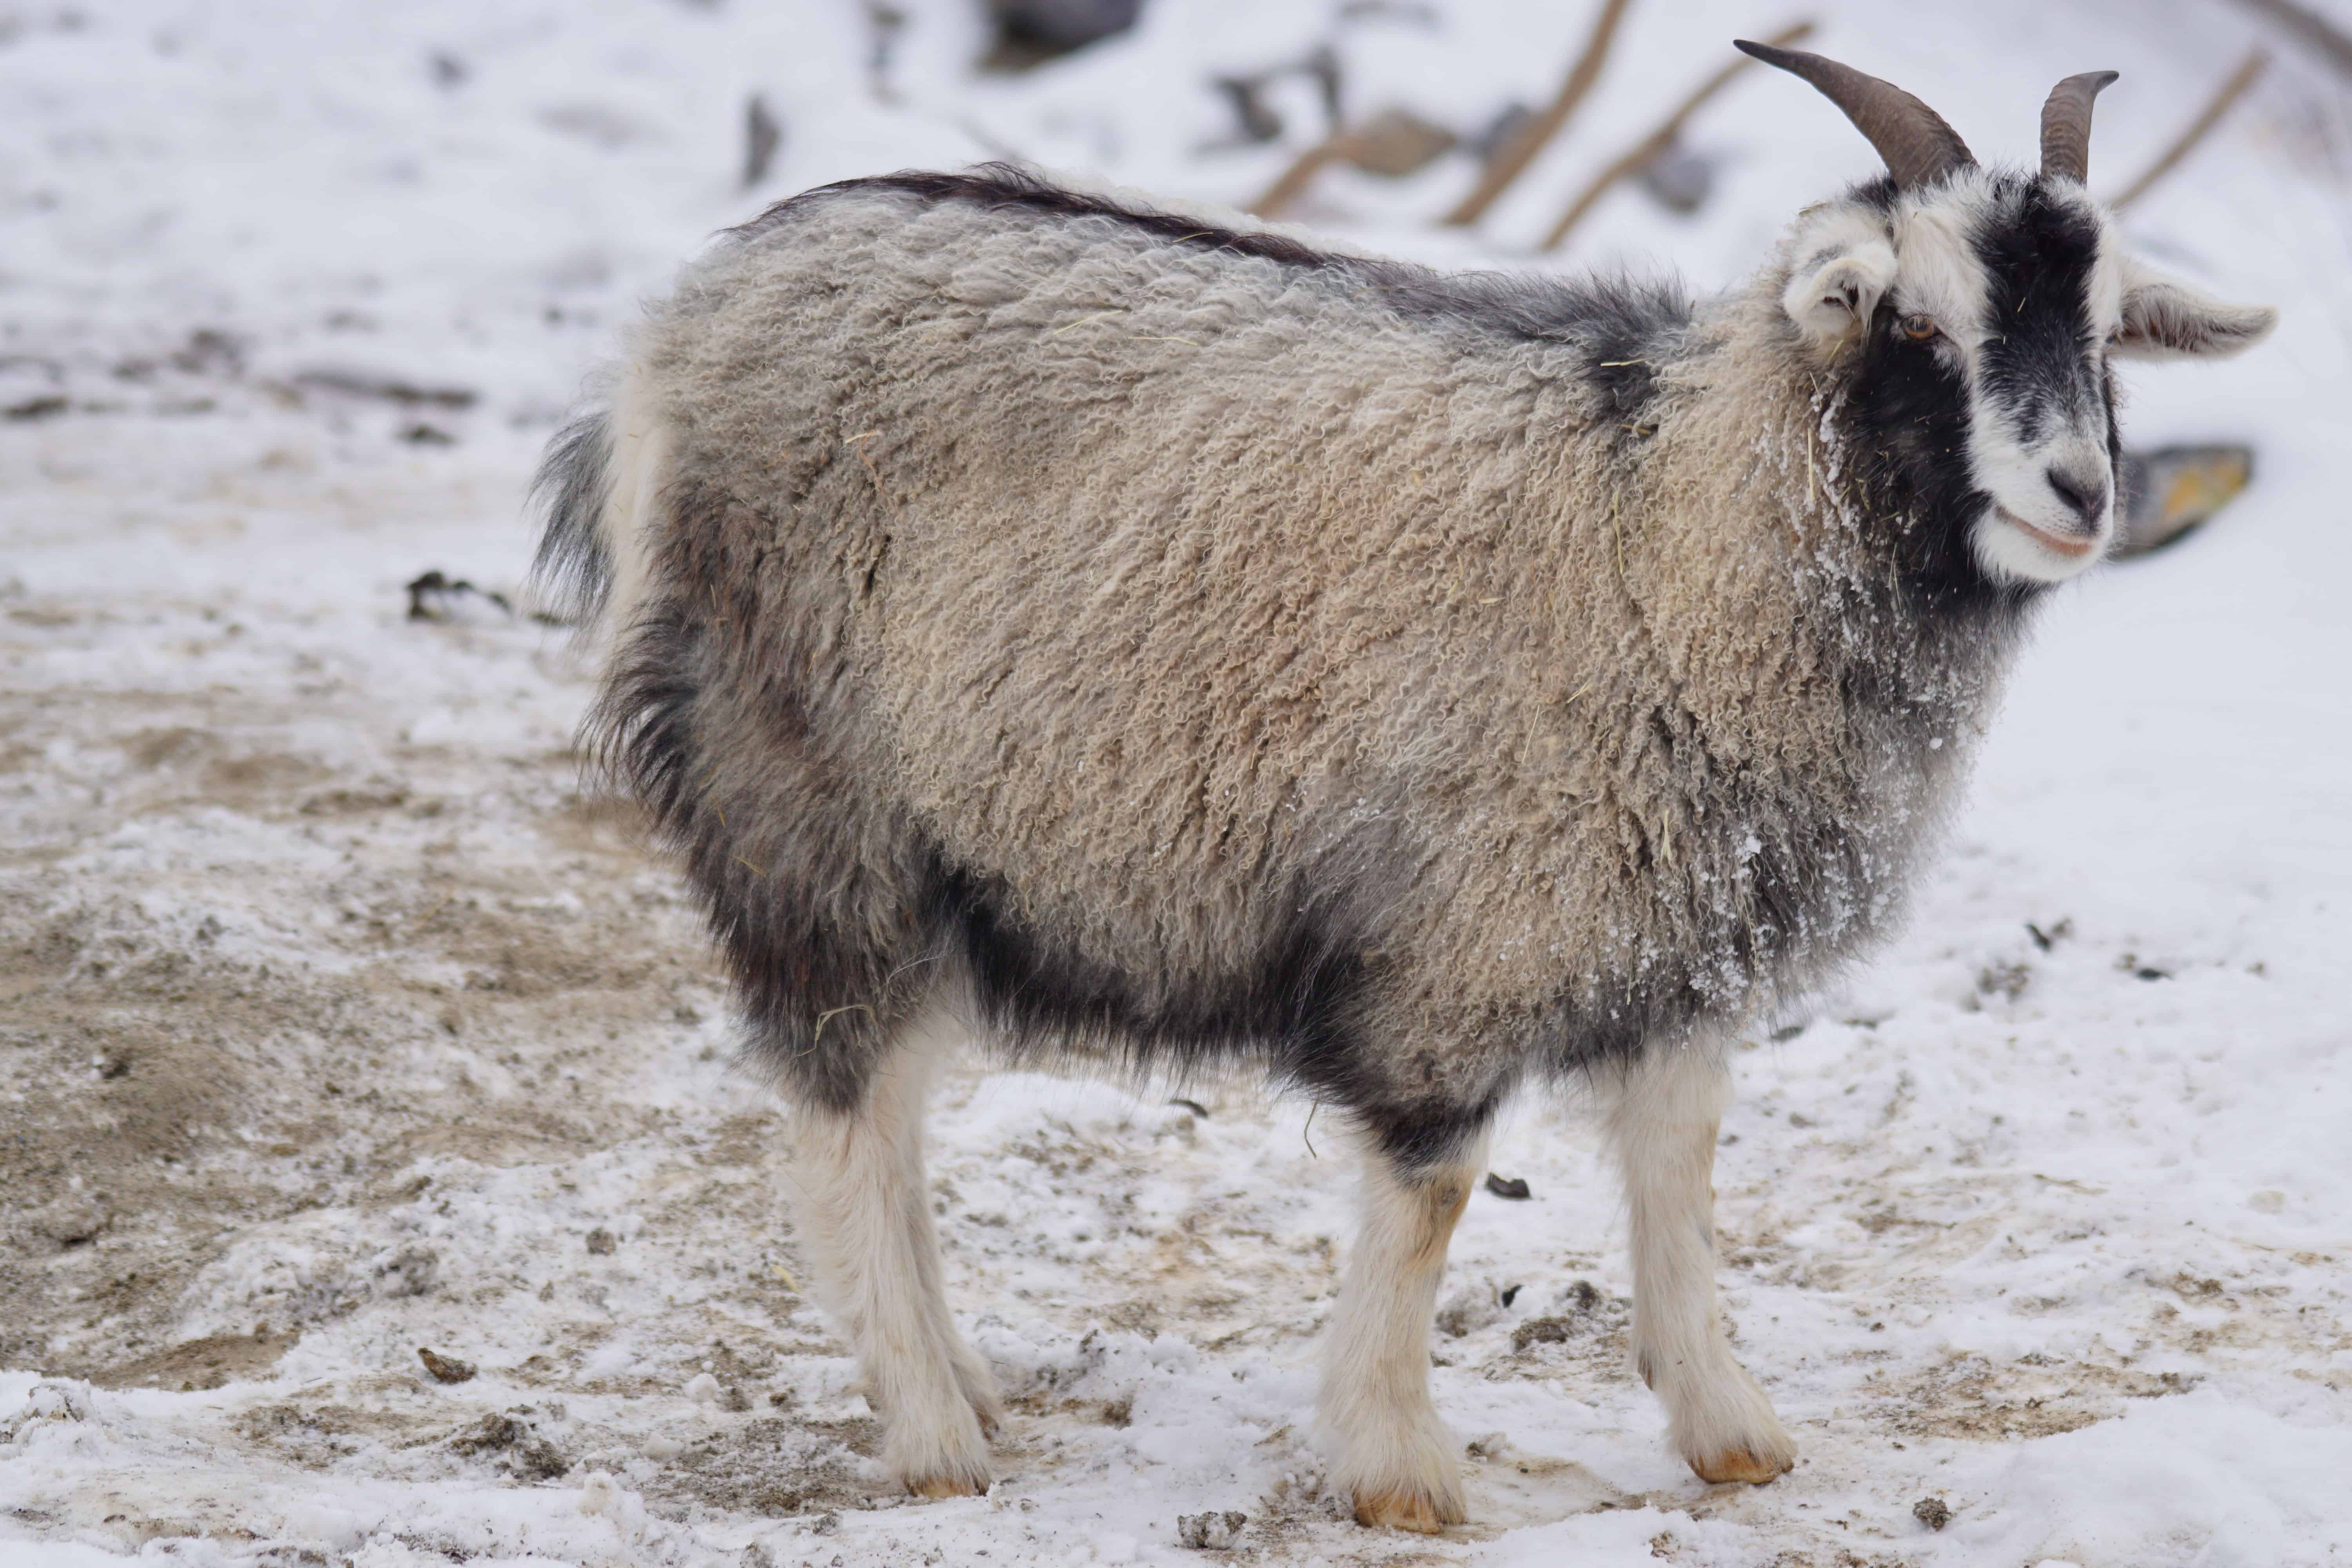 A goat standing in the snow